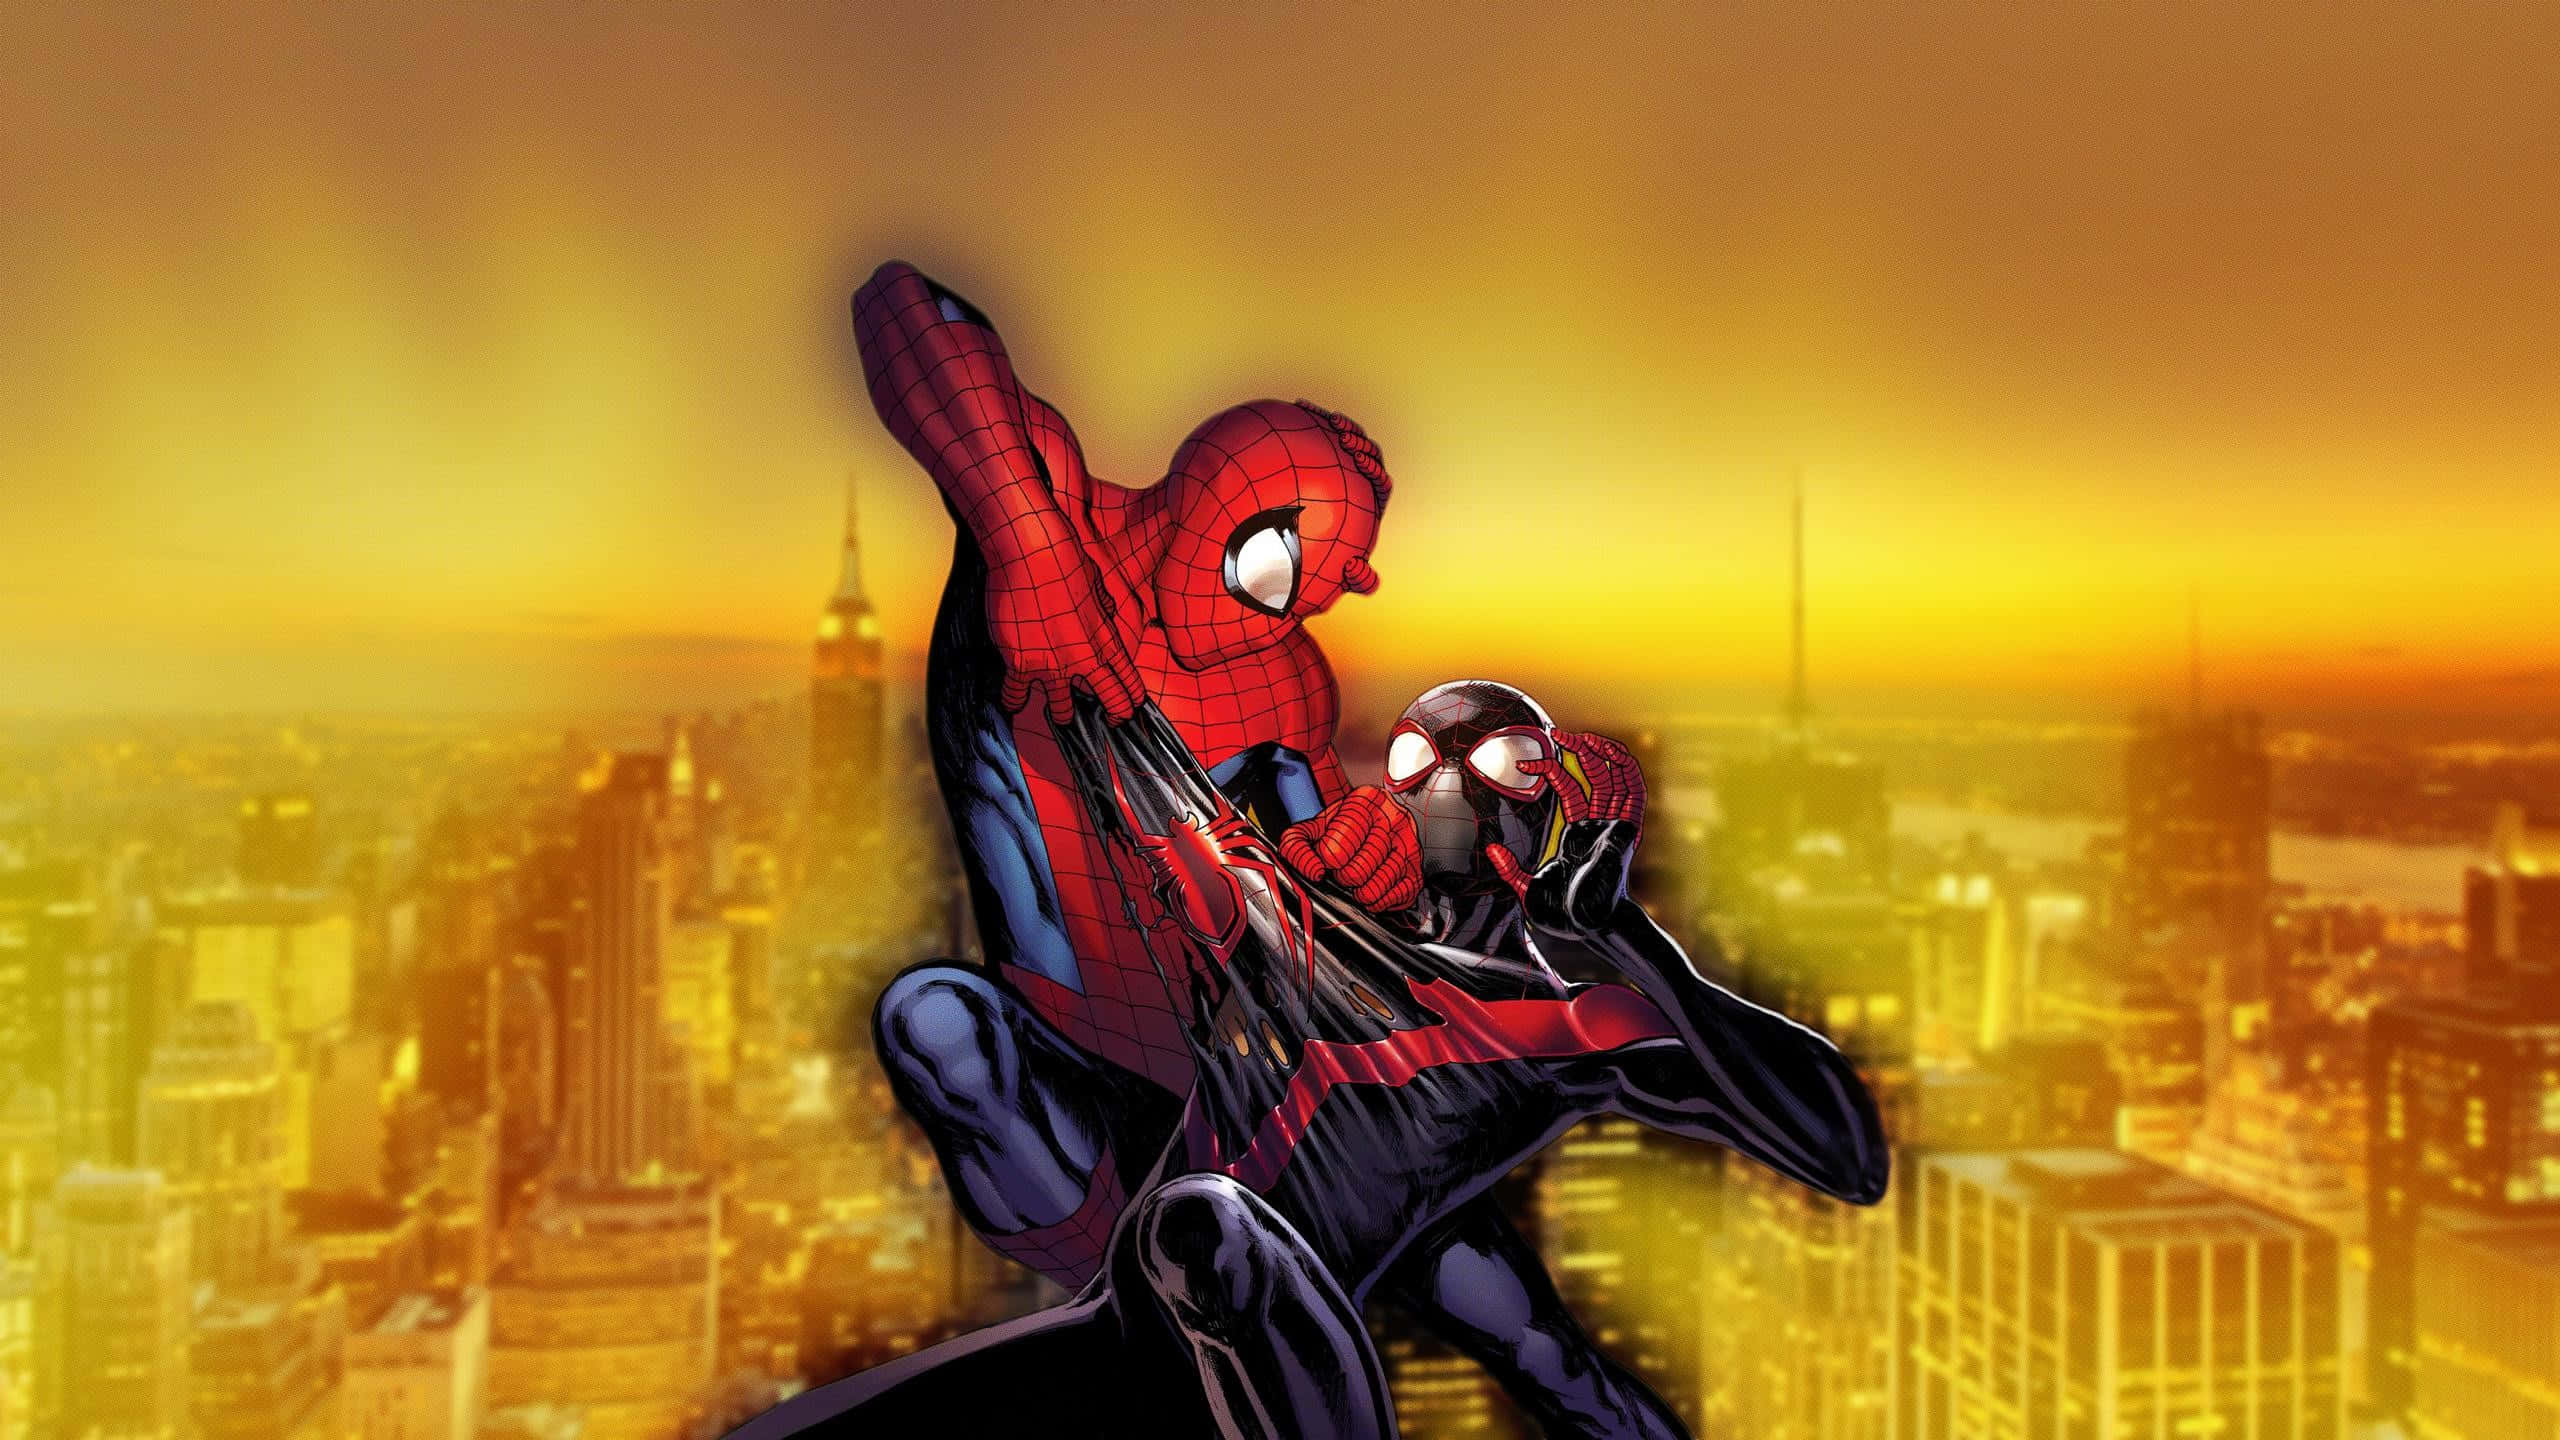 Ultimate Spider-Man Swinging High Above the City Wallpaper